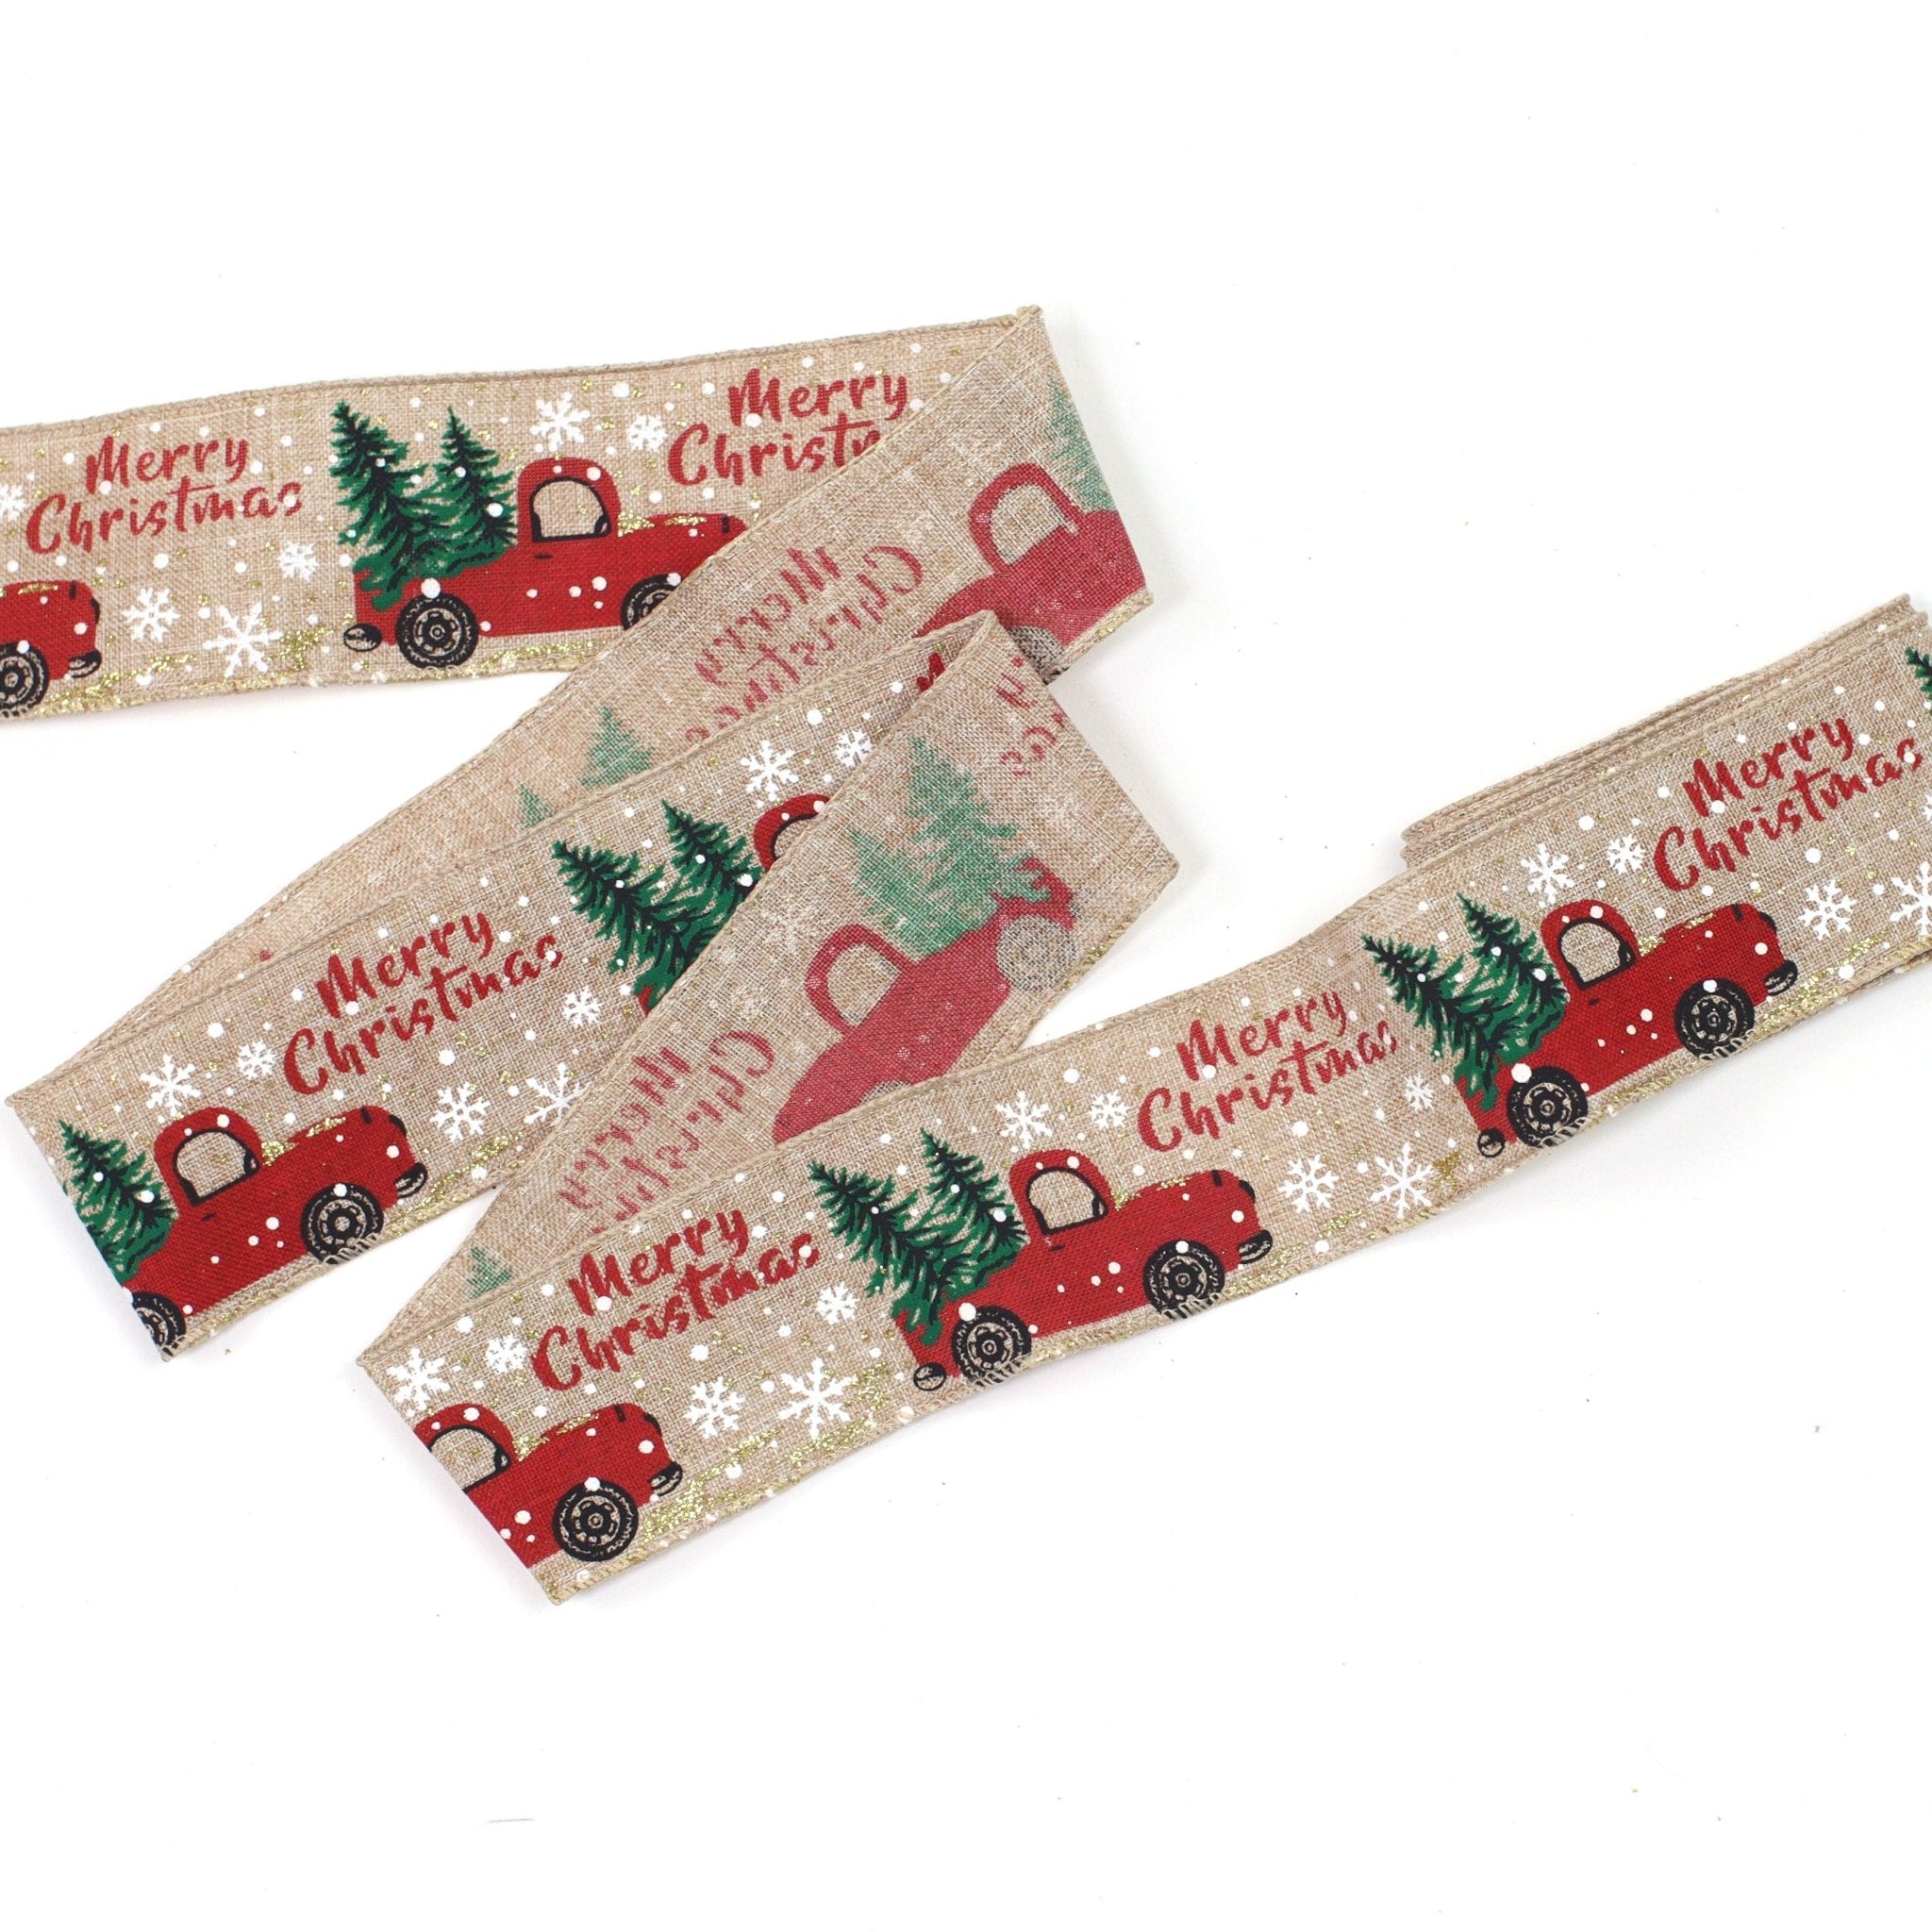 50mm x 2M Merry Christmas Red Truck Wired Ribbon 5002002 - MODA FLORA Santa's Workshop